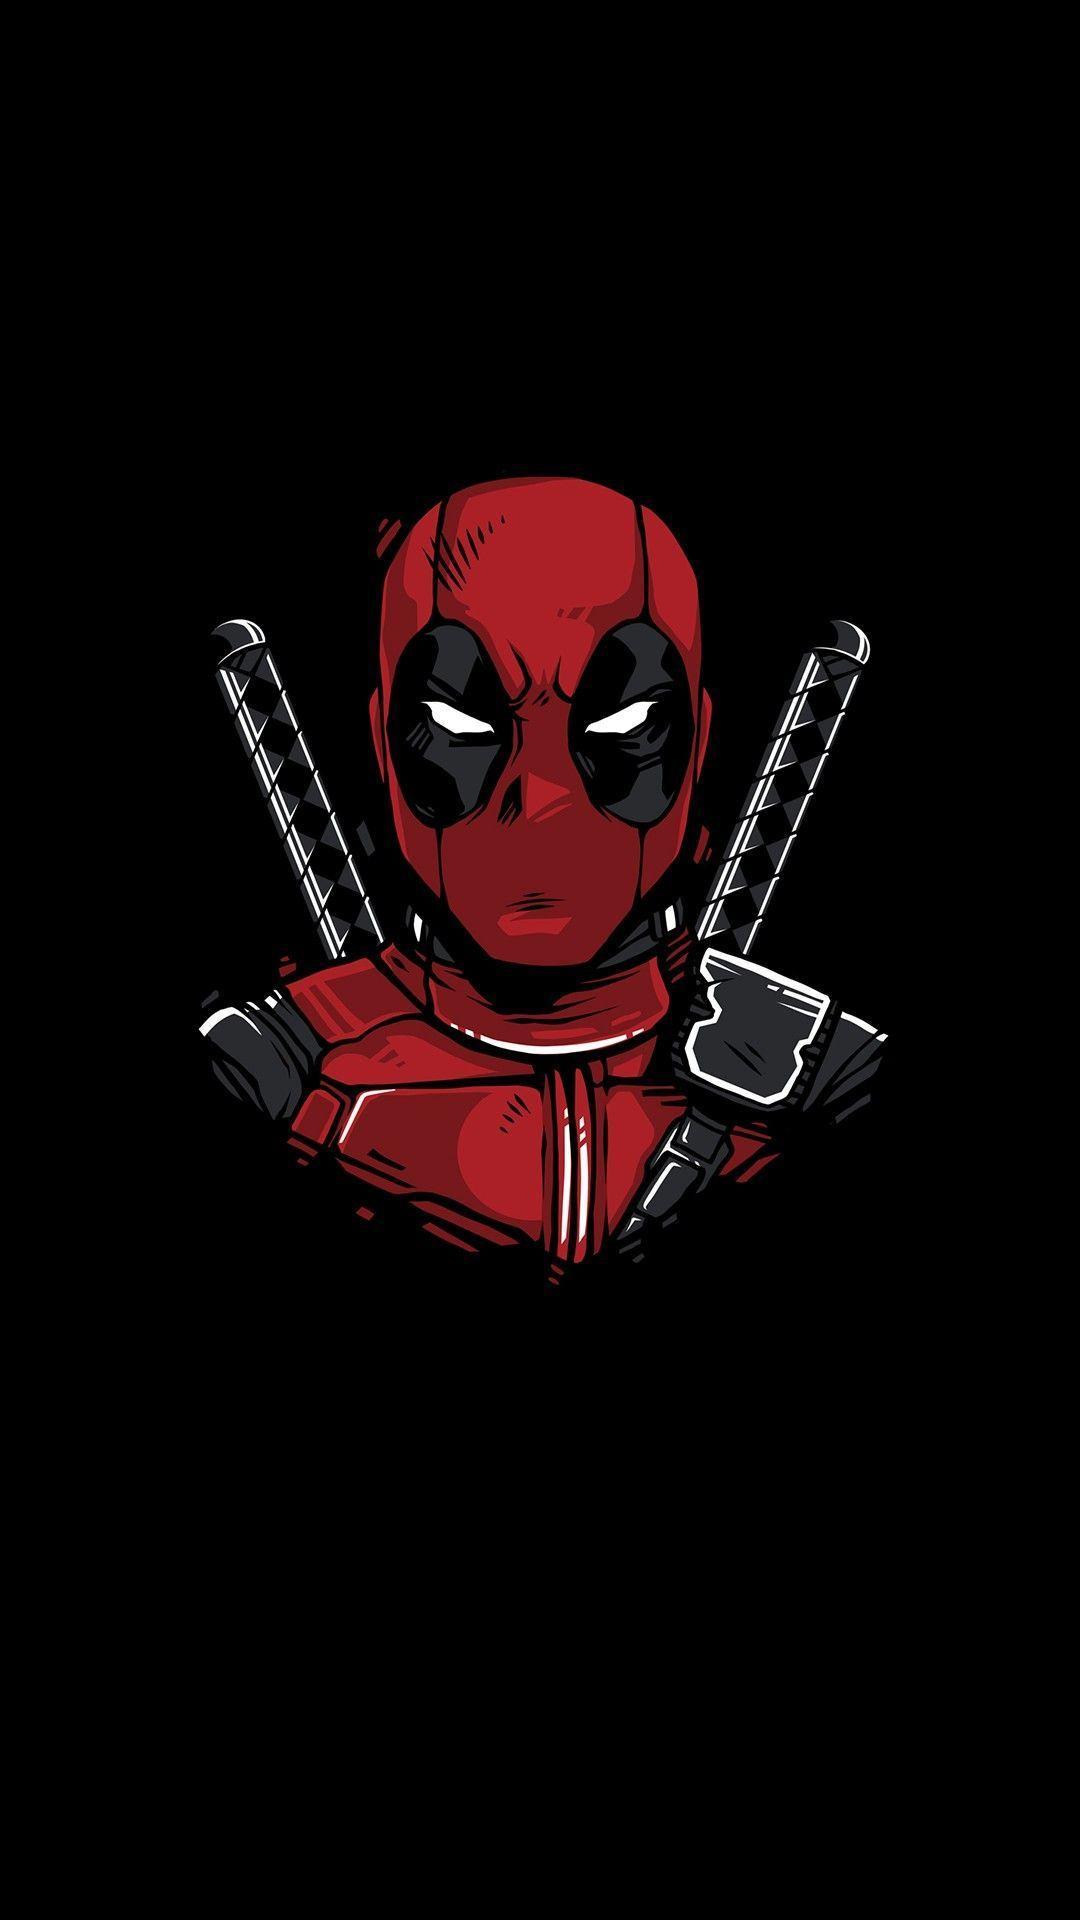  Deadpool  HD  Wallpapers  Marvel Deadpool  Hero for Android  